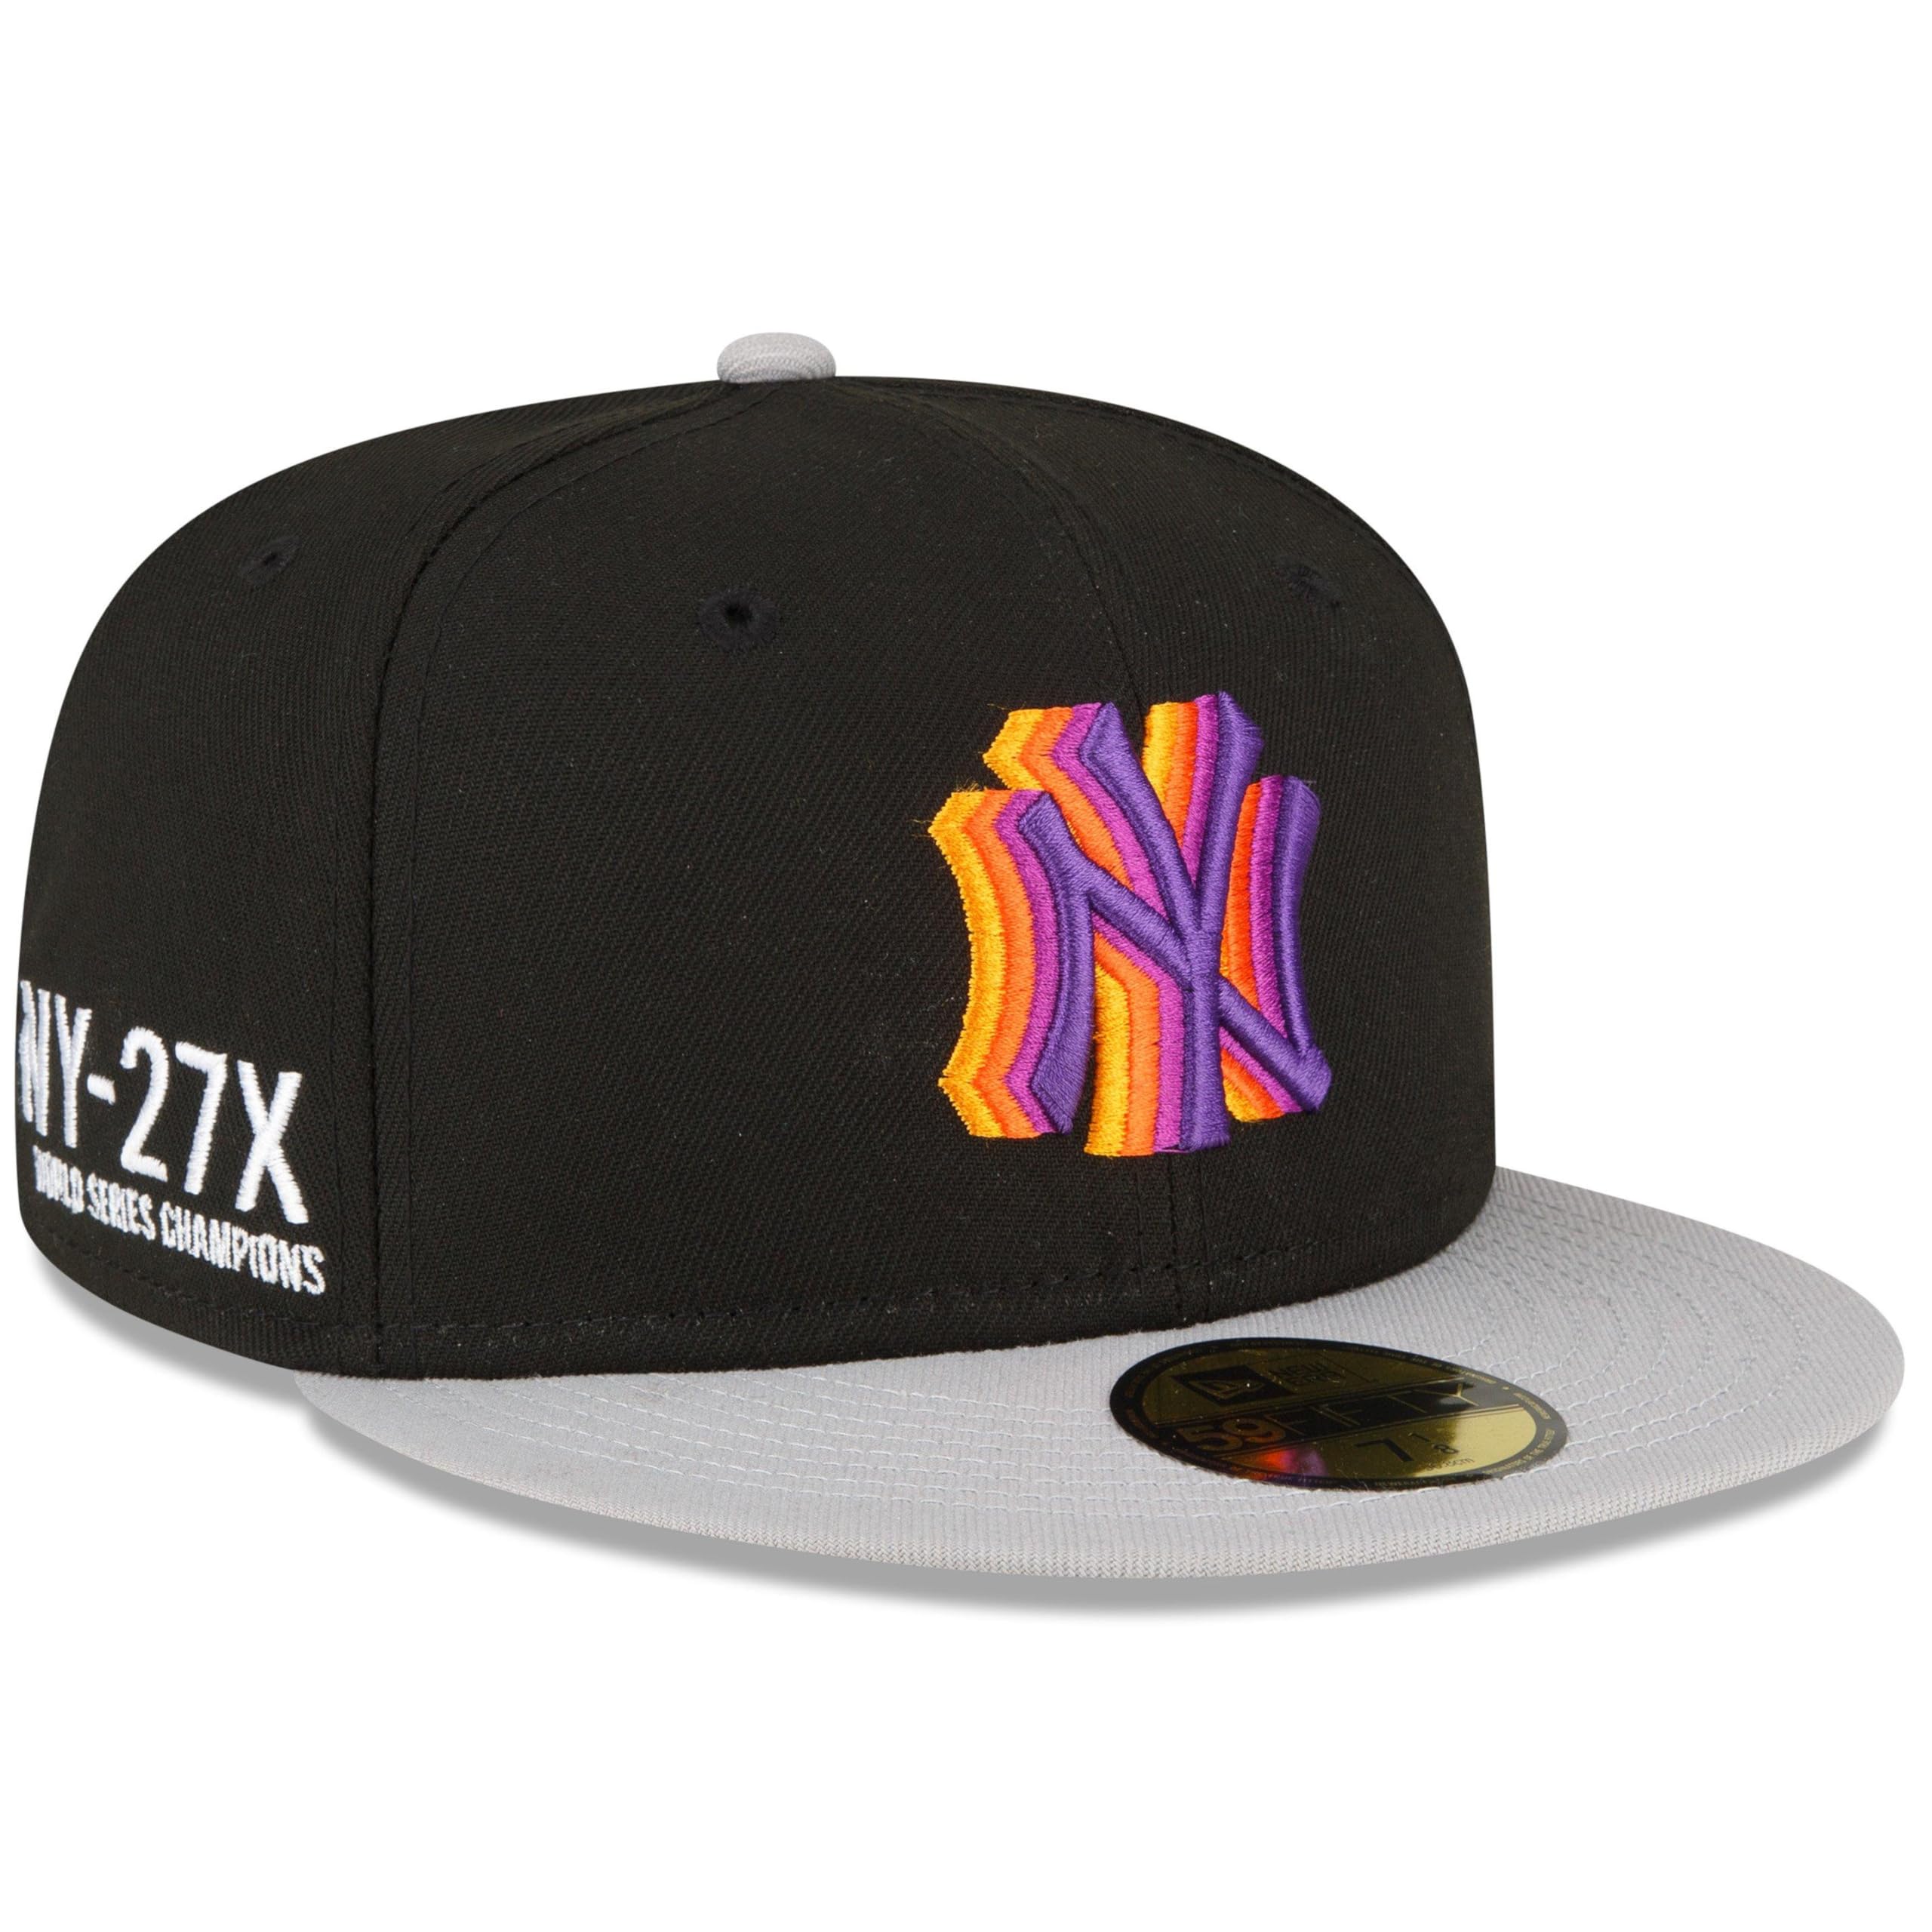 New Era NY New York Yankees 59FIFTY Rewind 27x World Series Champions Side Patch Fitted Cap, Hat (US, Numeric, 7 1/4, Black) - Caps Fitted Caps Fitted New Era